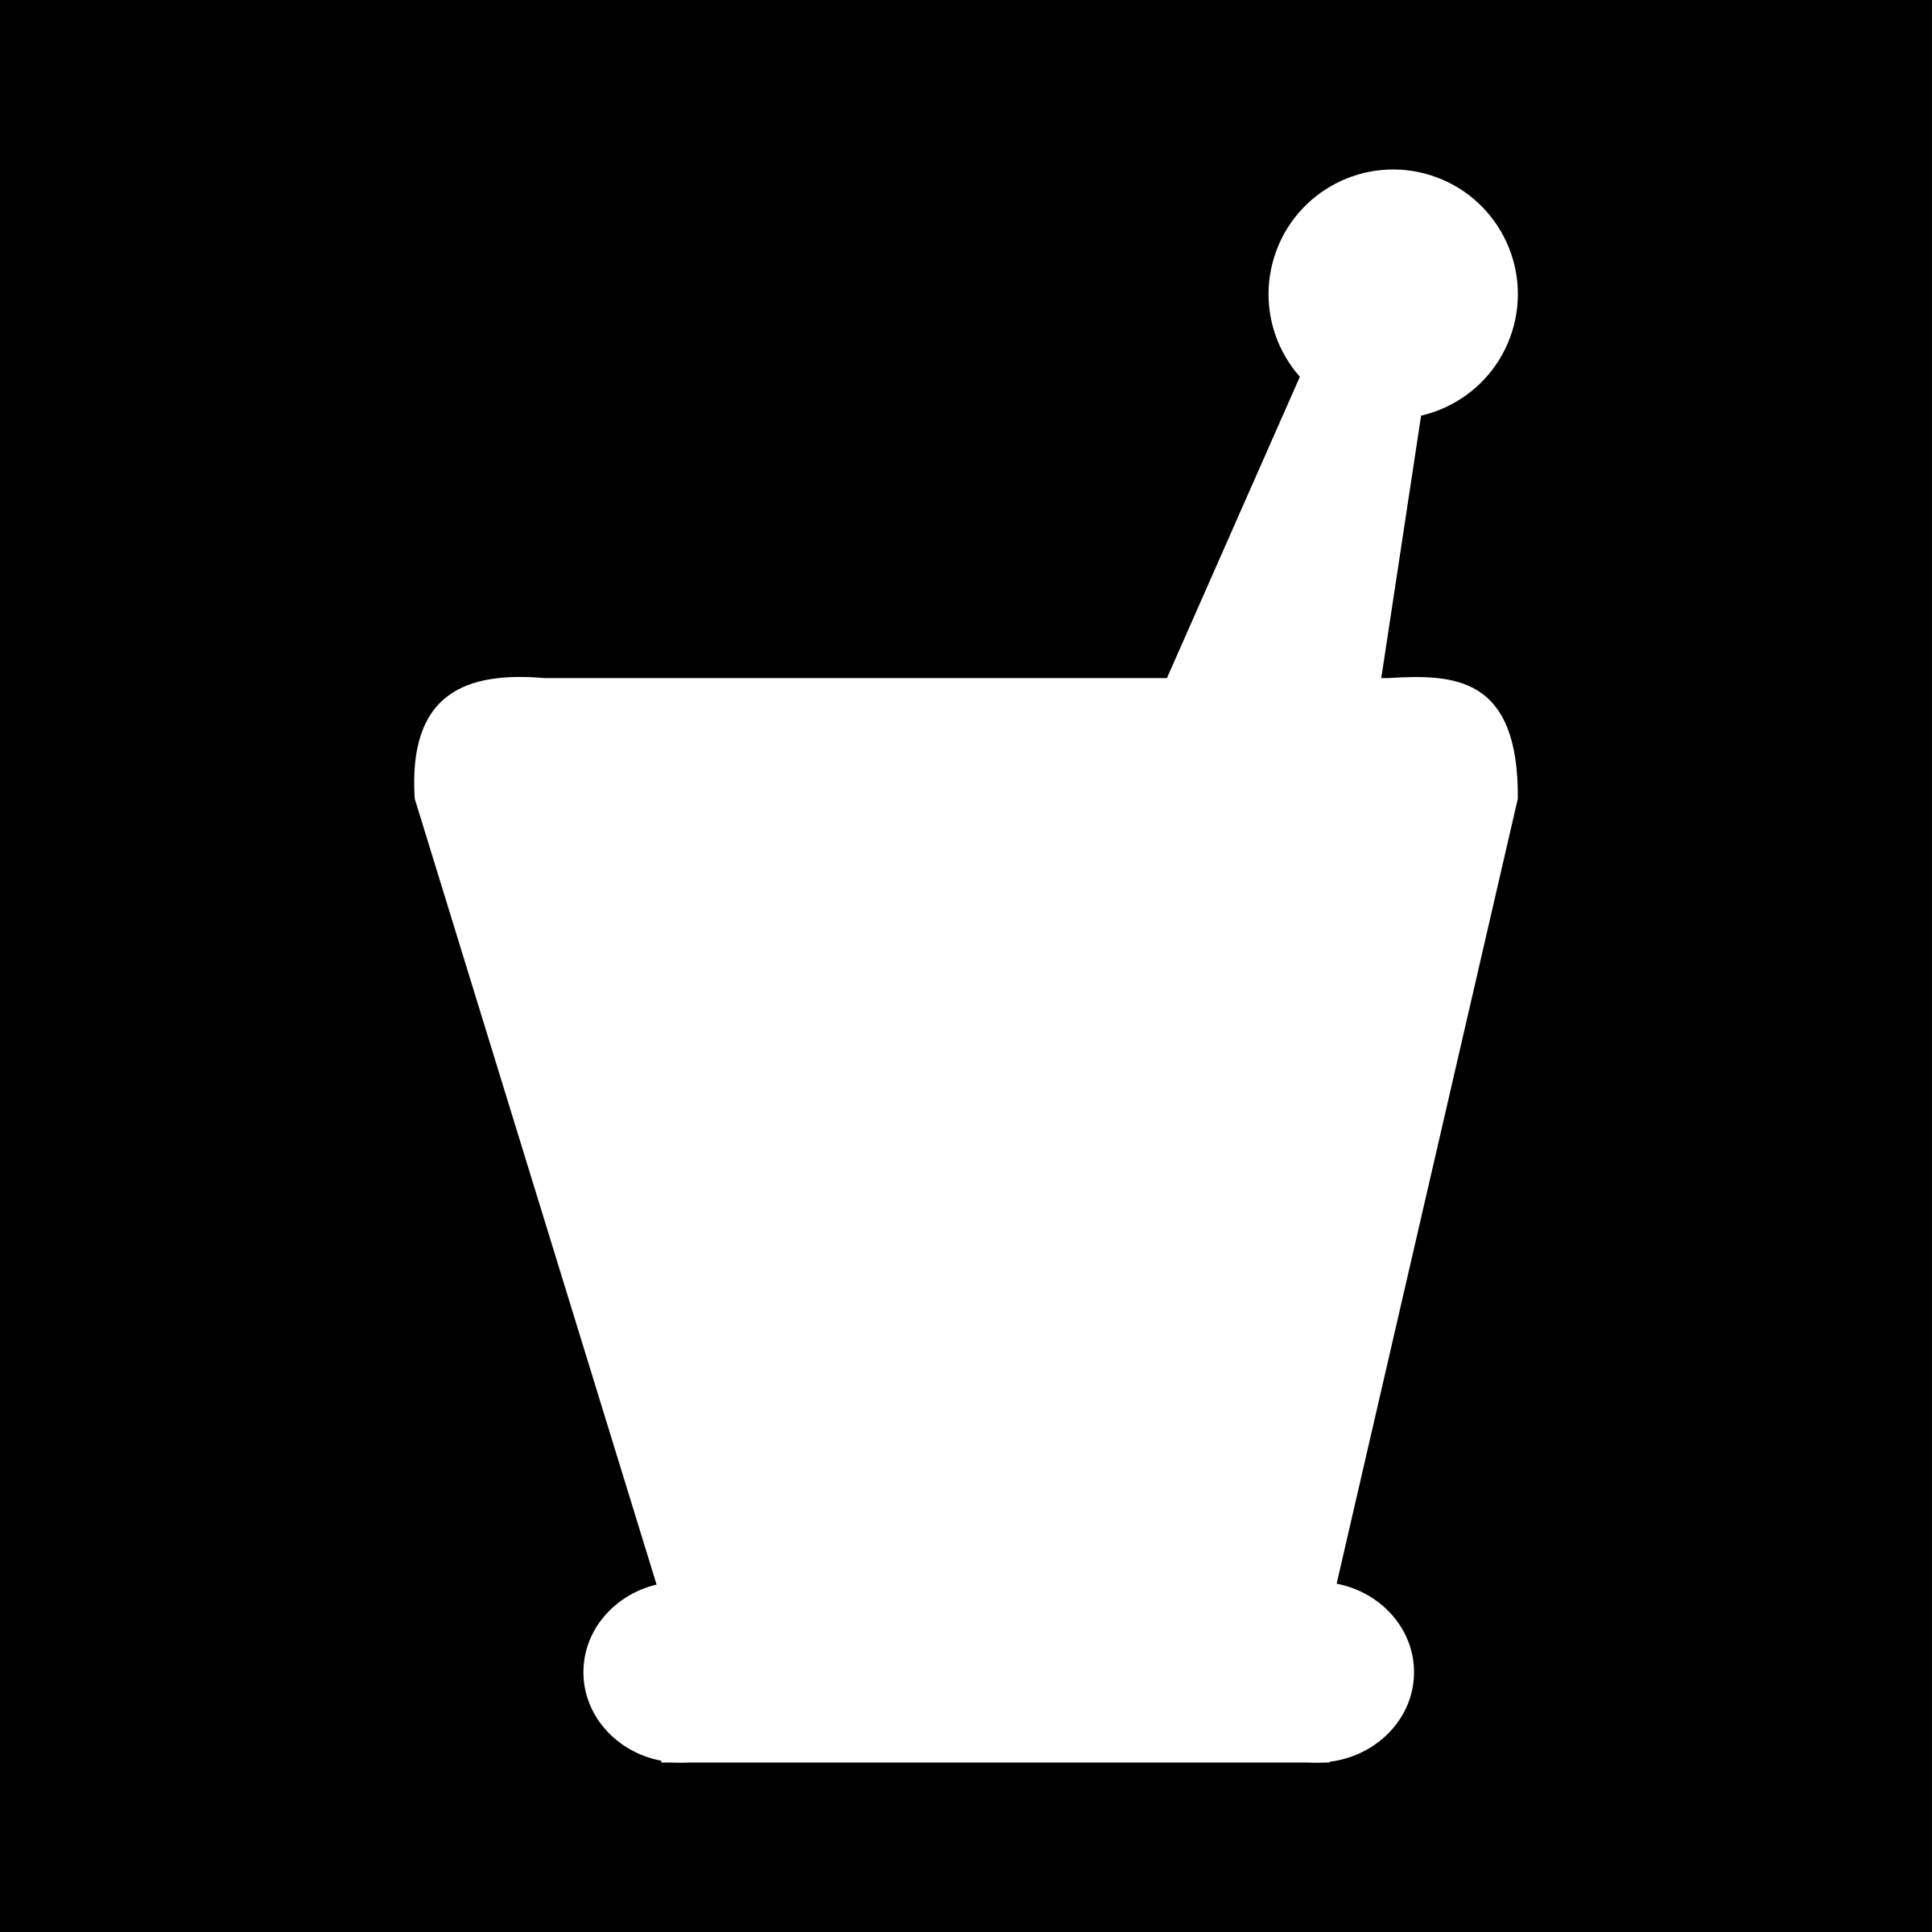 Clip Arts Related To : mortar and pestle rx. 